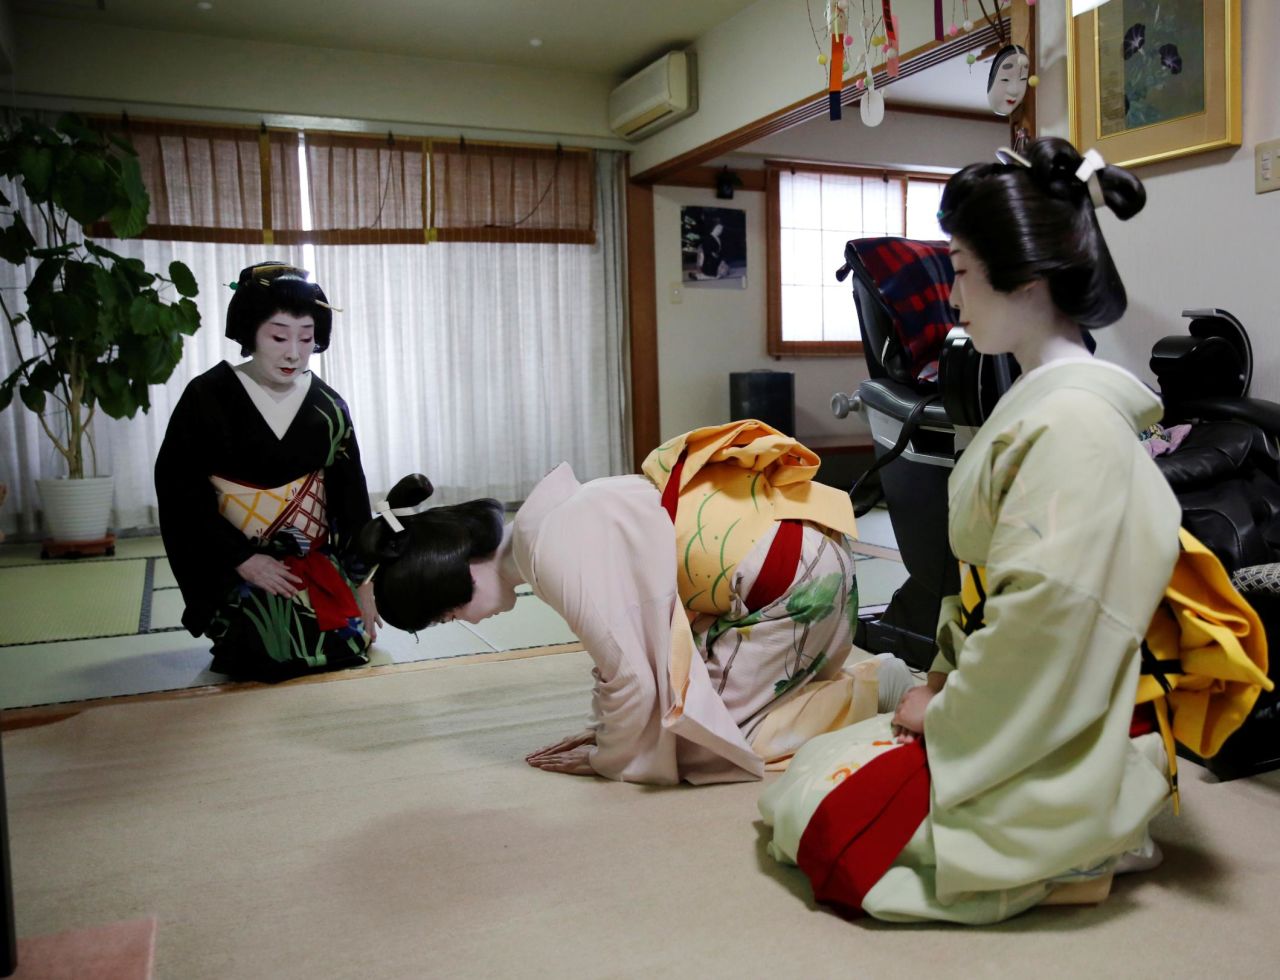 Geishas Mayu and Maki bow to Ikuko before making their way to work at a party being hosted by customers during the coronavirus pandemic in June 2020.